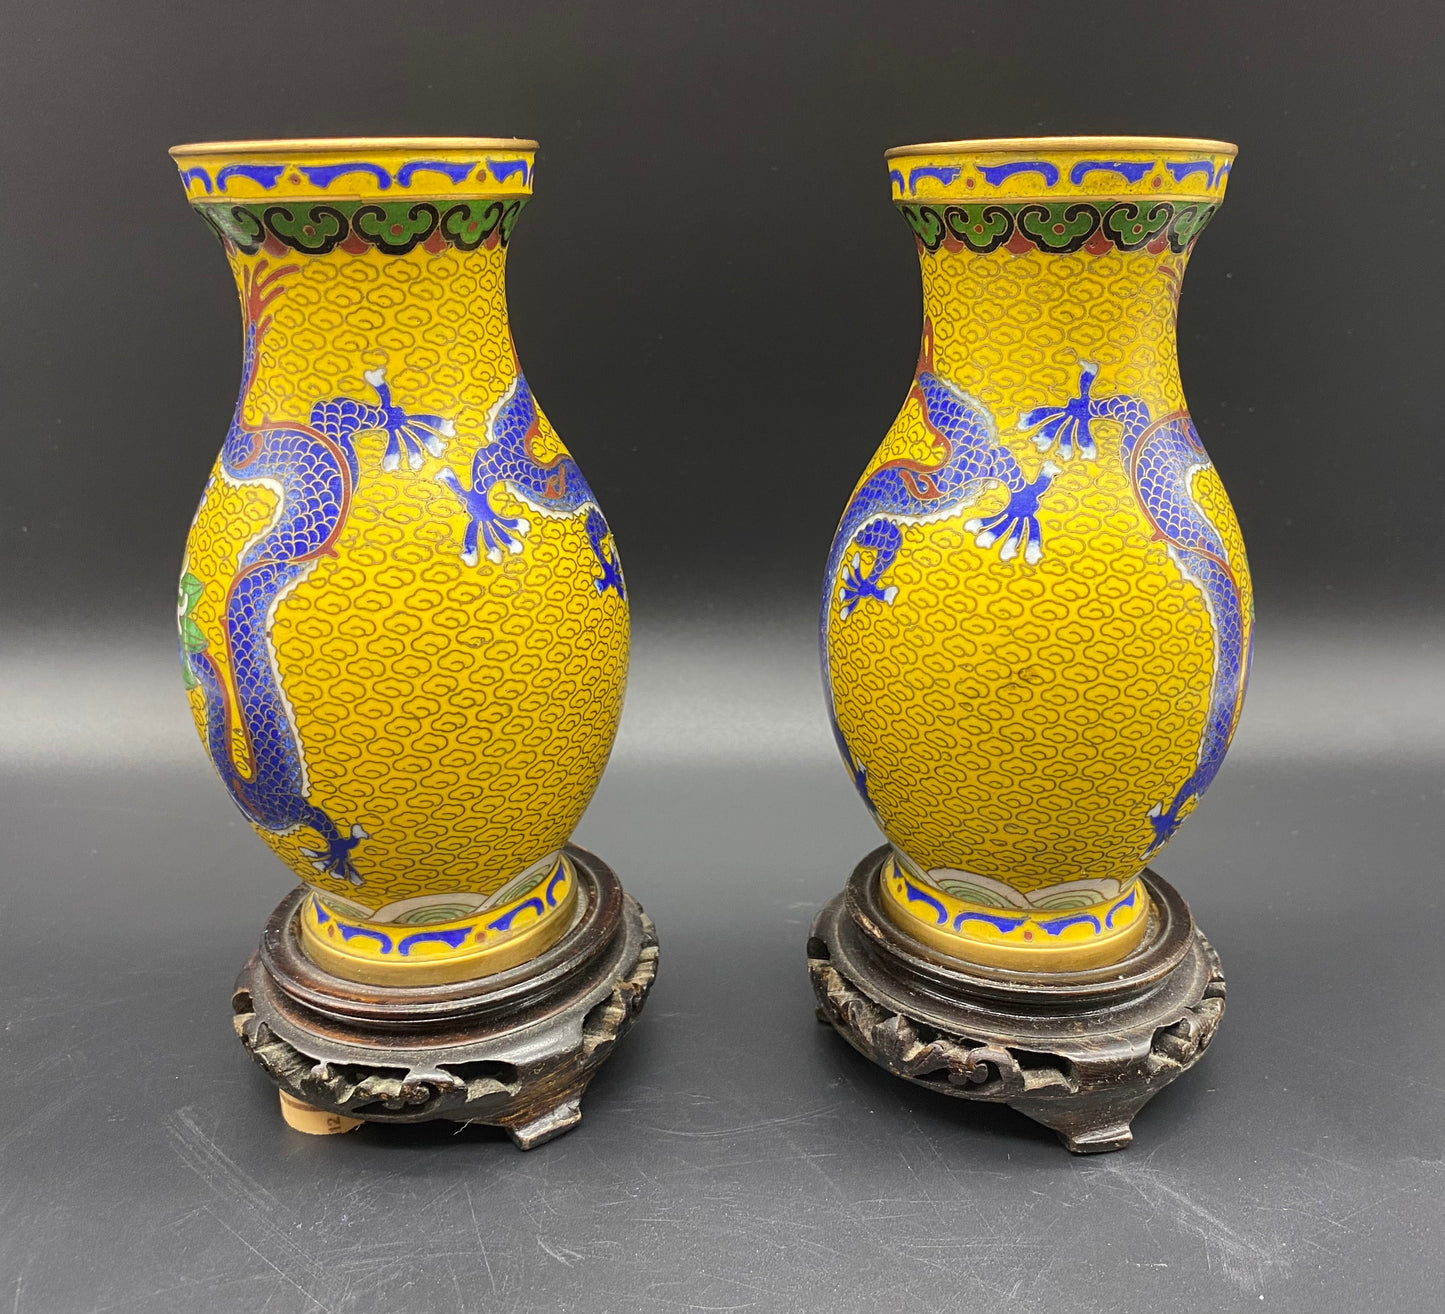 The vessel is usually fired at a relatively low temperature, about 800°C. Enamels commonly shrink after firing, and the process is repeated several times to fill in the designs.